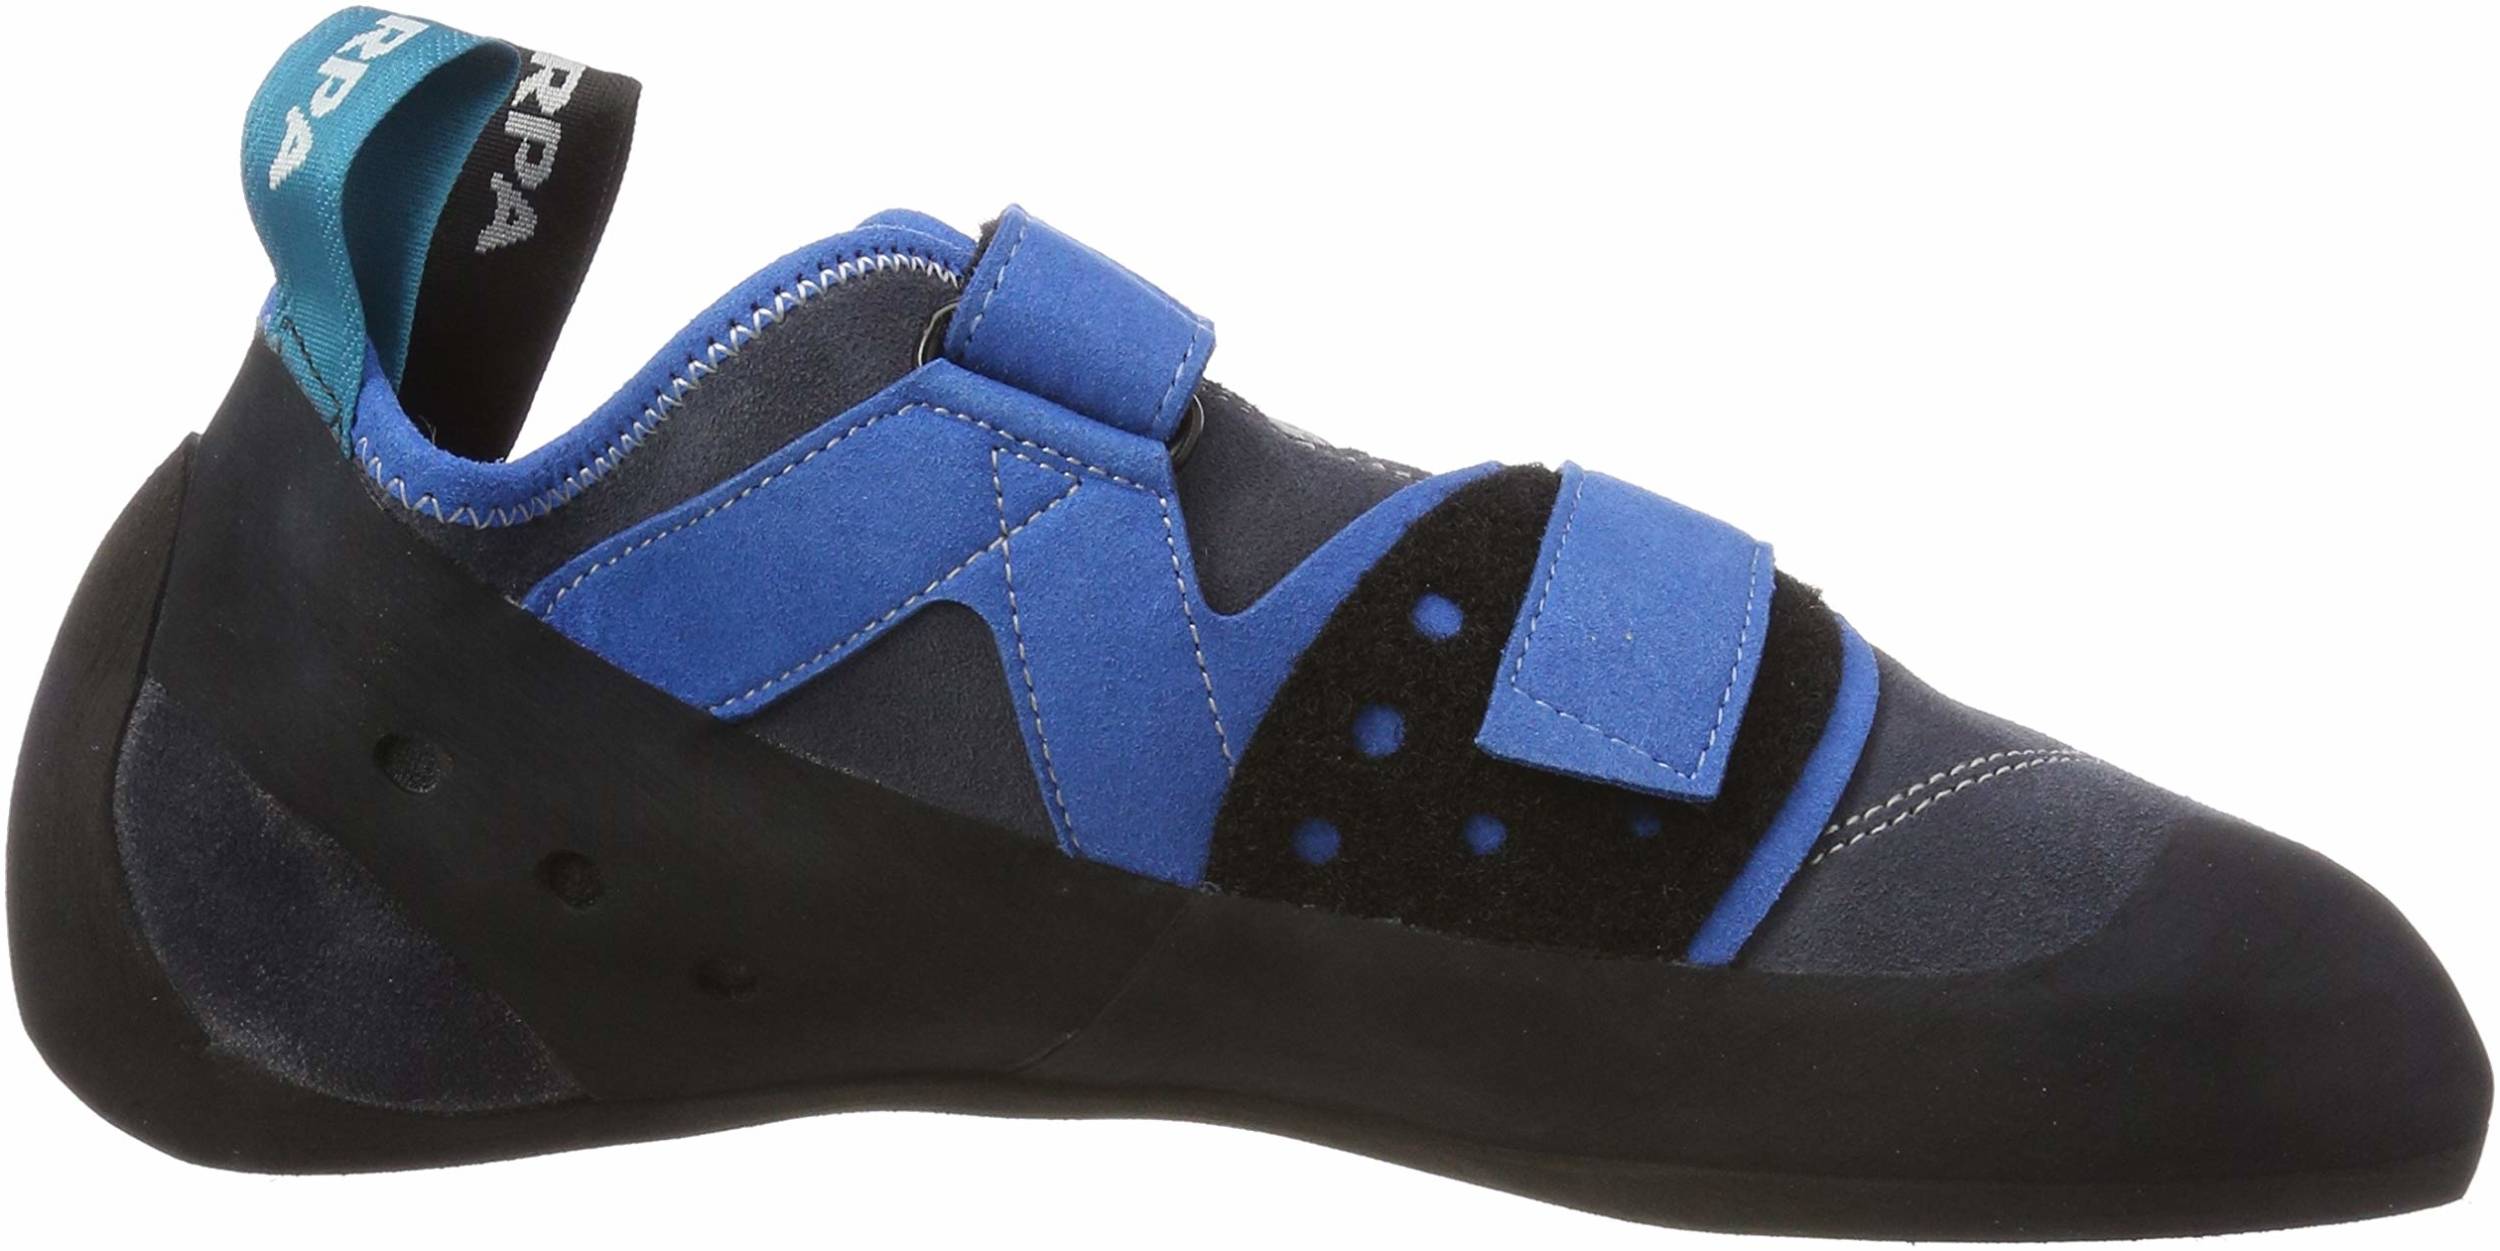 Only $27 + Review of Scarpa Origin 